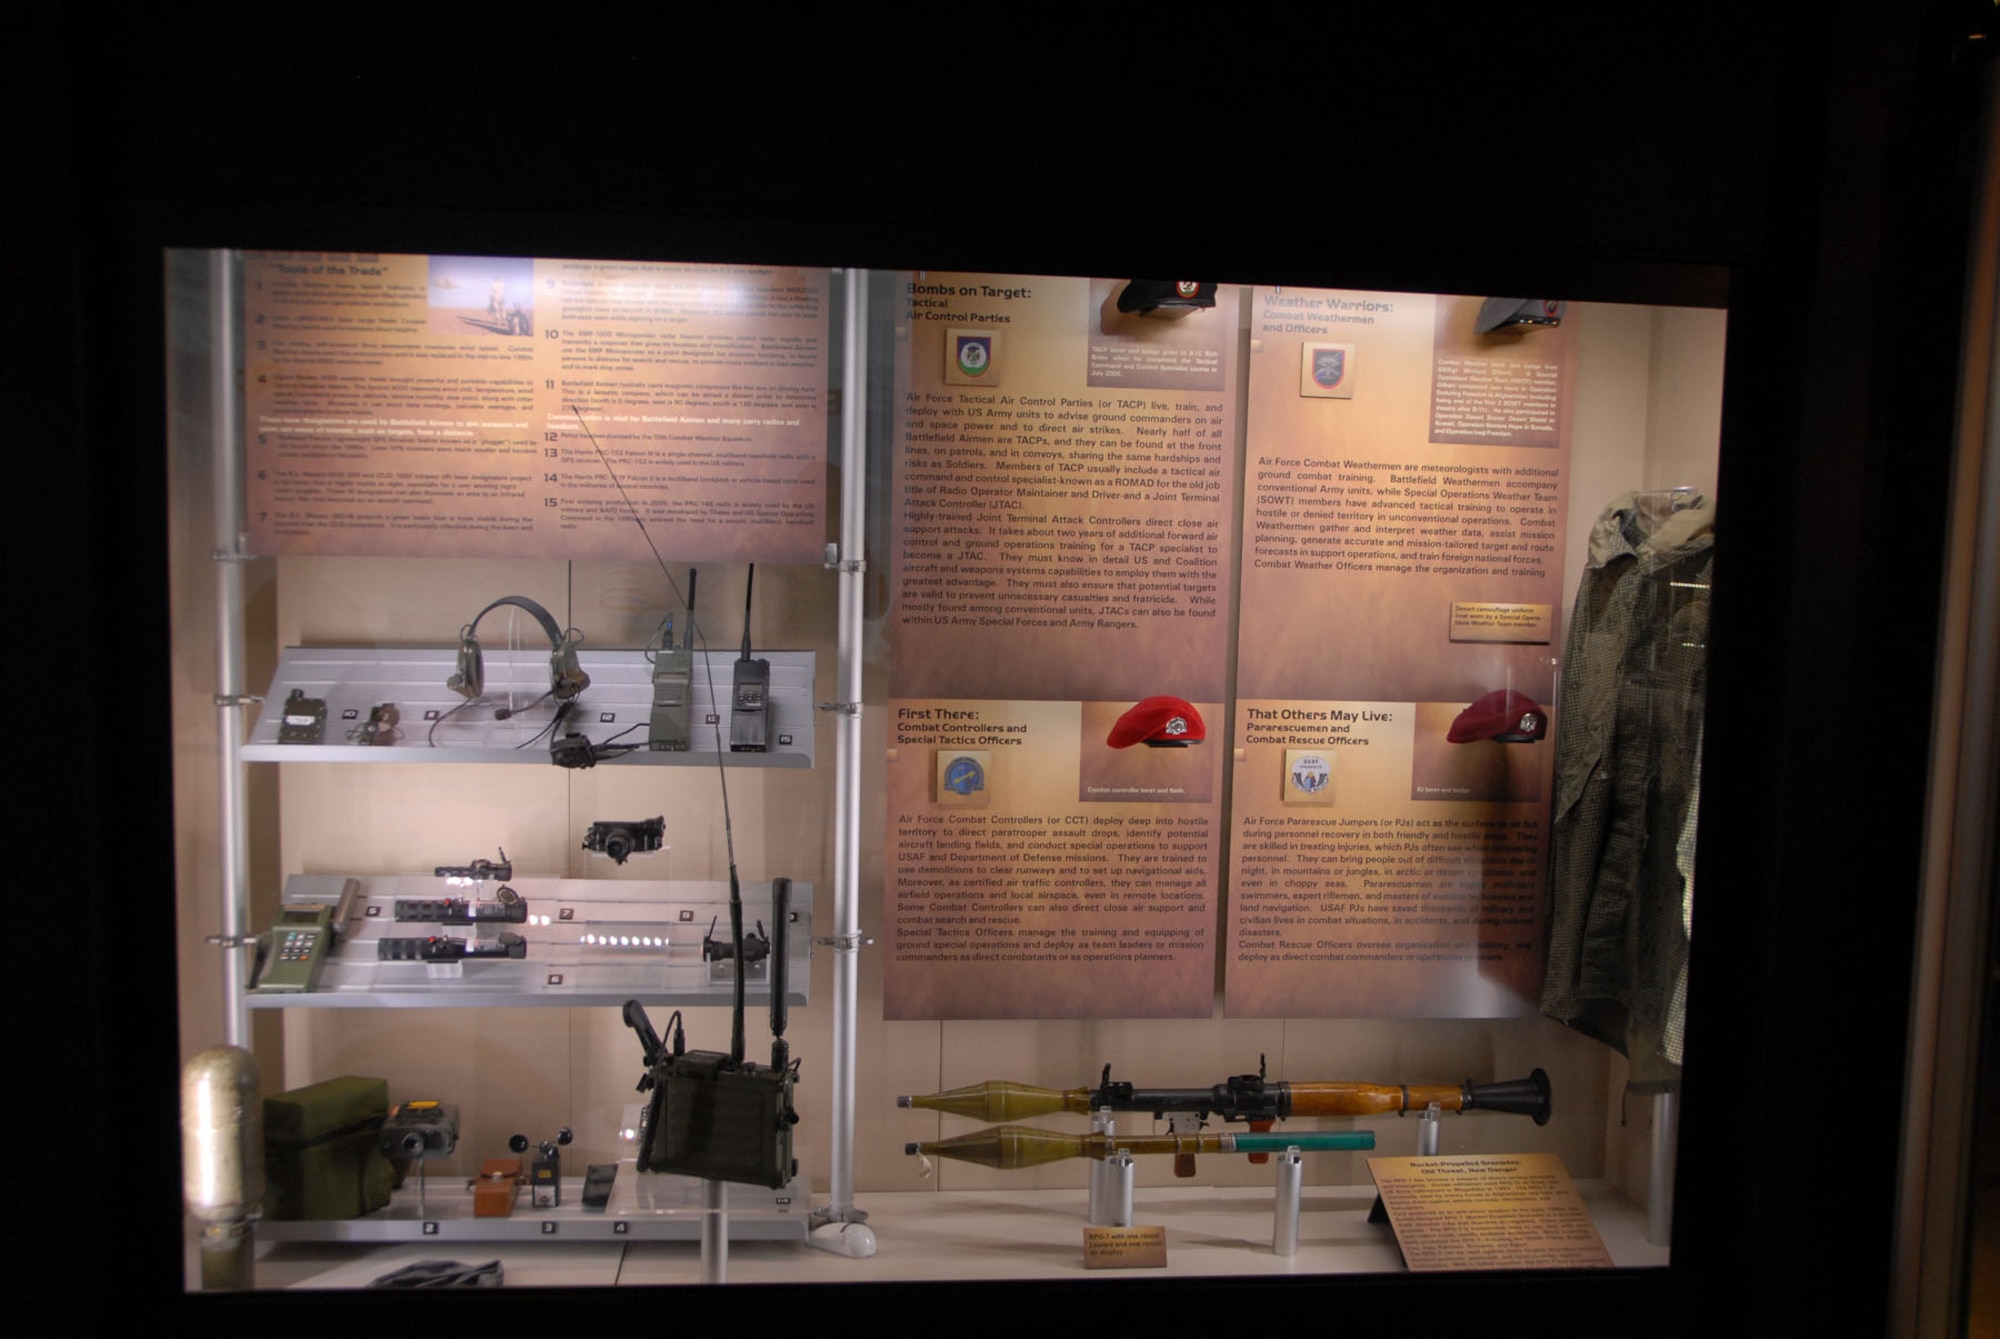 DAYTON, Ohio - A portion of the Warrior Airmen exhibit on display in the Cold War Gallery at the National Museum of the U.S. Air Force. (U.S. Air Force photo)